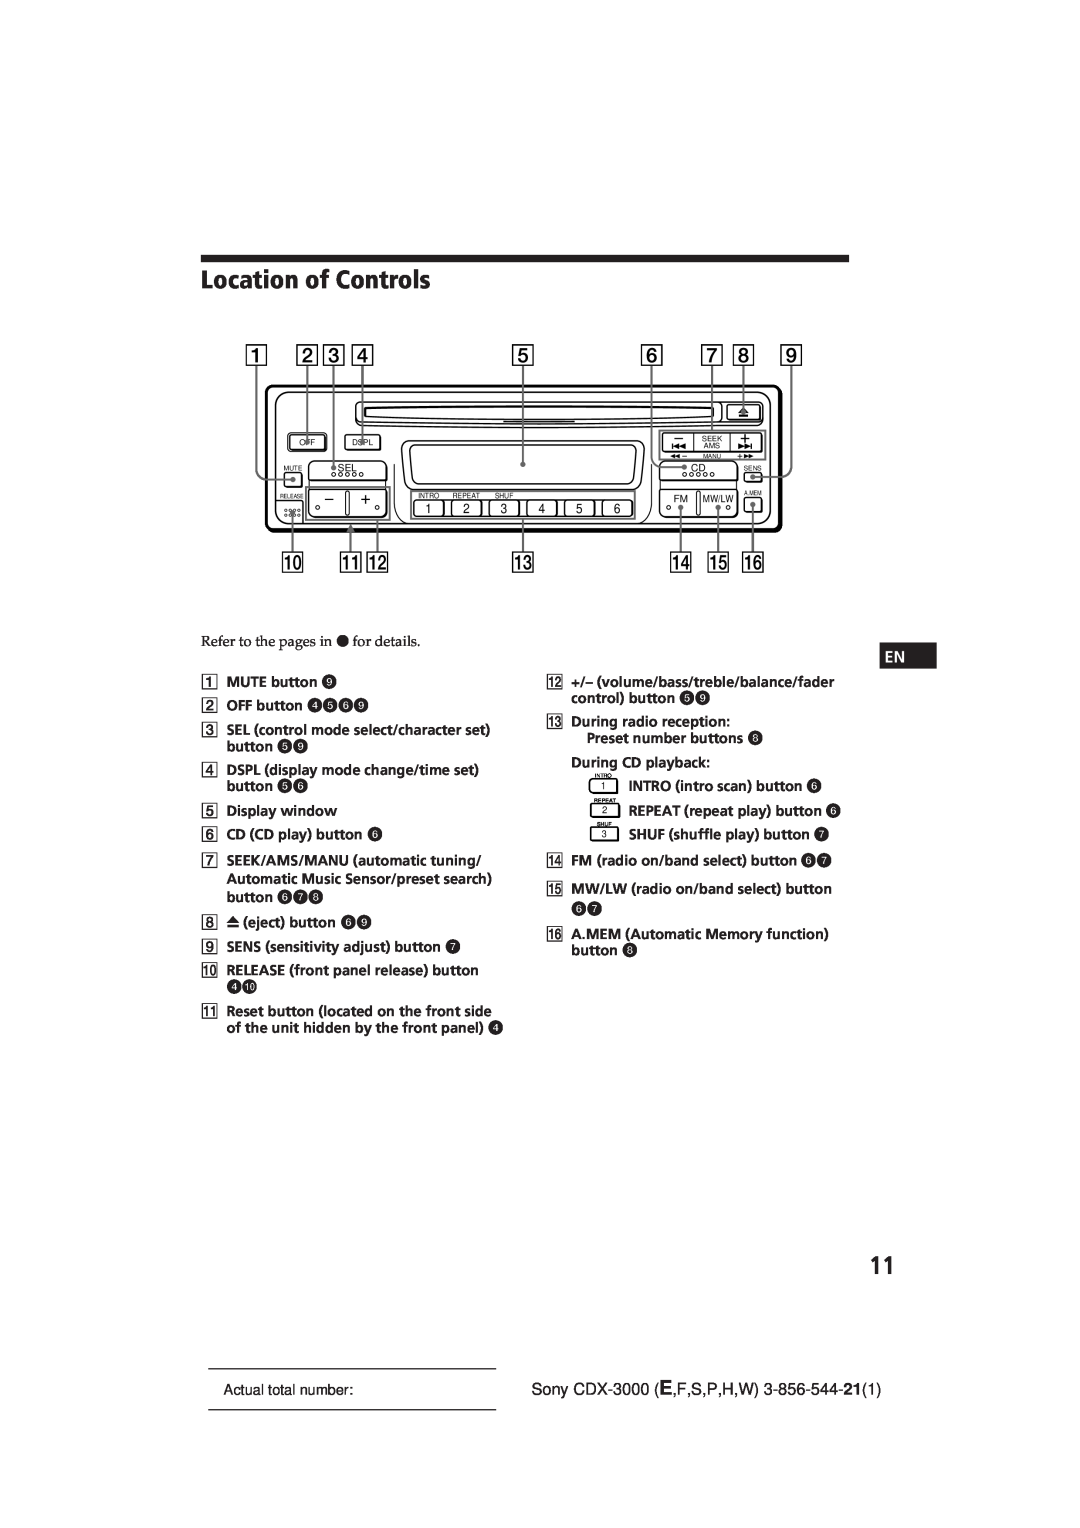 Sony CDX-3000 manual Location of Controls 